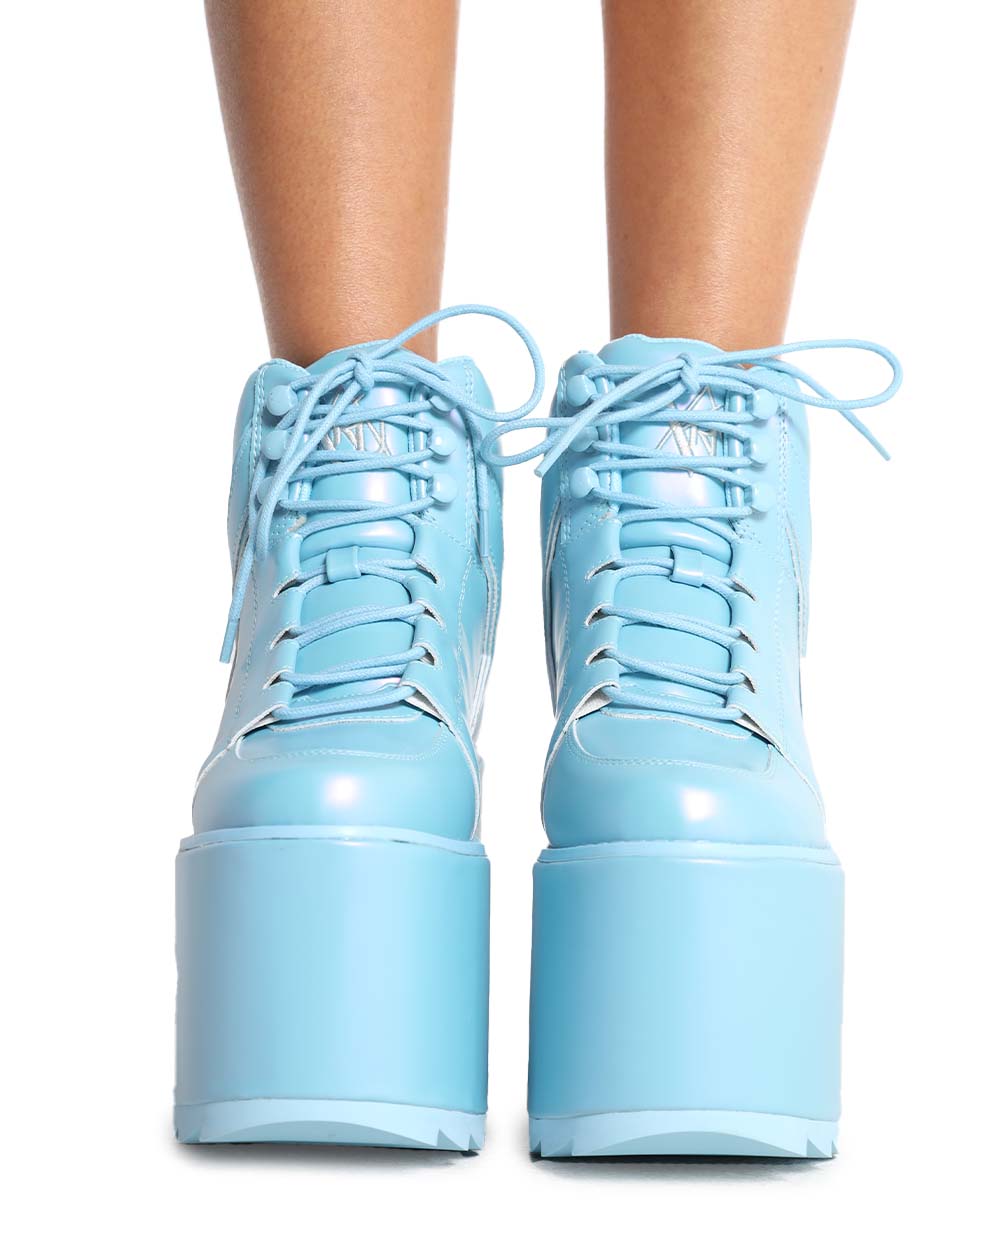 Yru Qozmo Baby Blue Iridescent Platform Boots - Baby Blue | iHeartRaves EDC Rave Outfits, EDM Music Festival Clothes for Halloween Rave Costumes